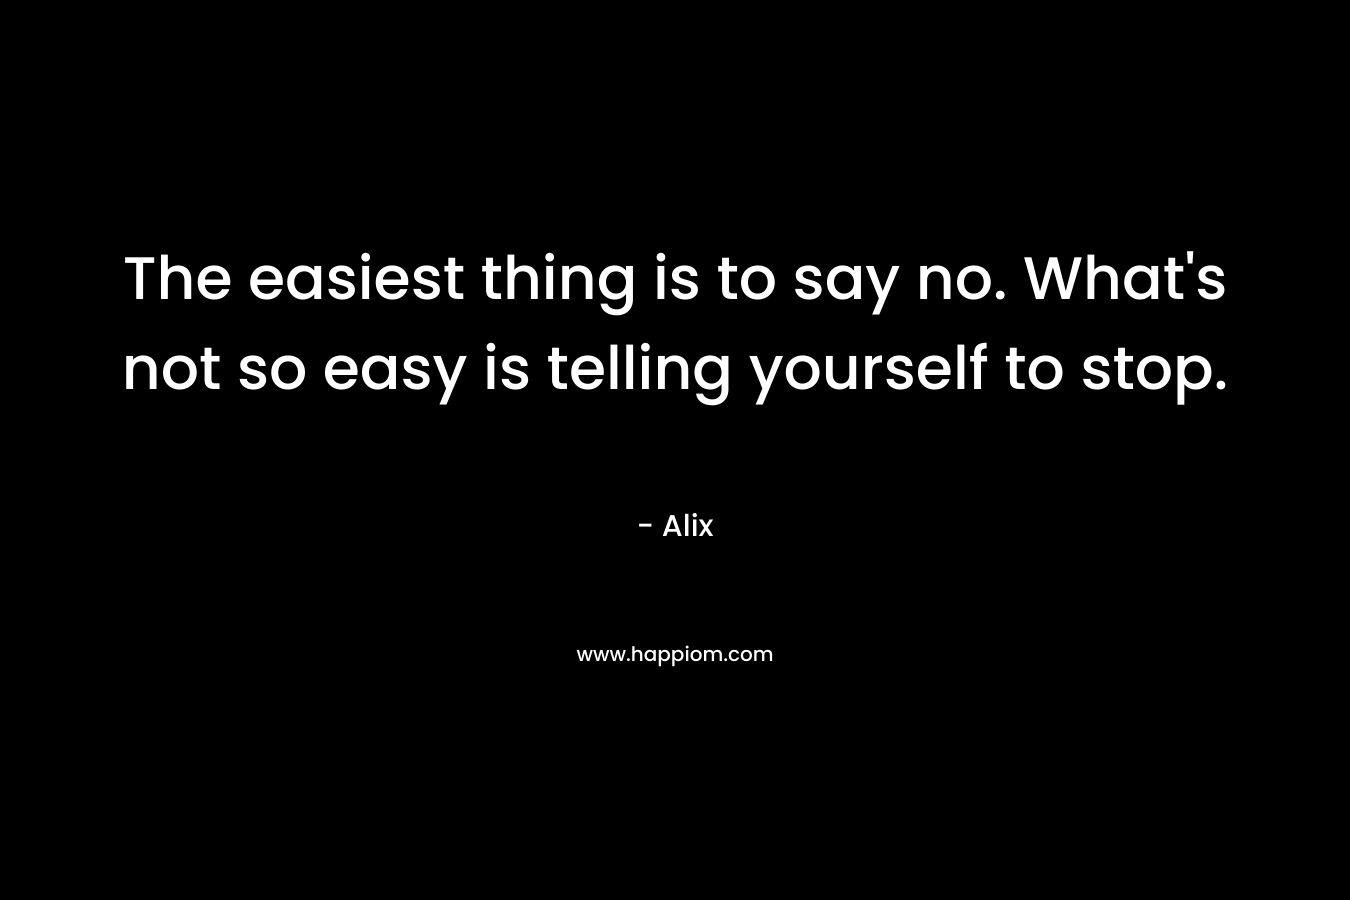 The easiest thing is to say no. What's not so easy is telling yourself to stop.